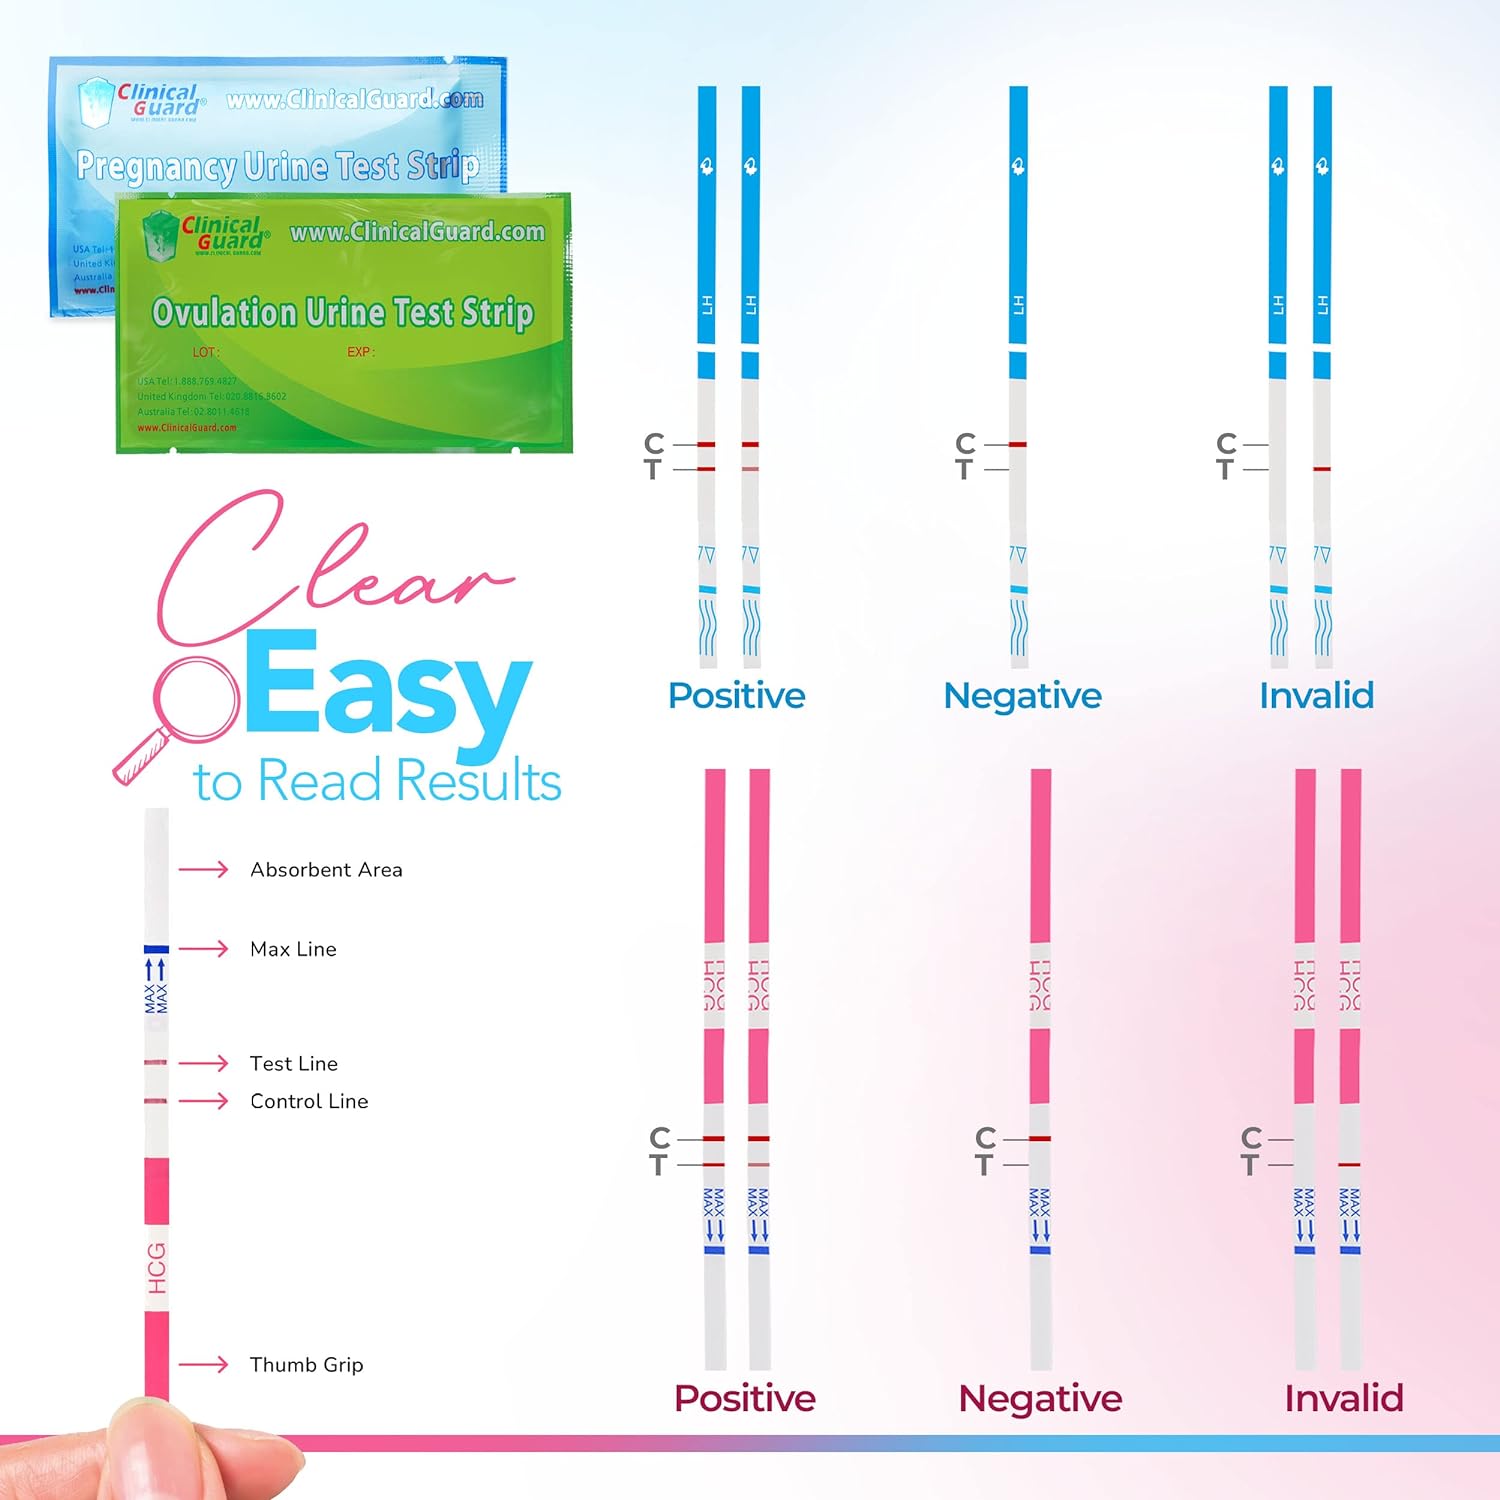 Combo Ovulation and Pregnancy Urine Test Strips Image 4 - How to Read Results